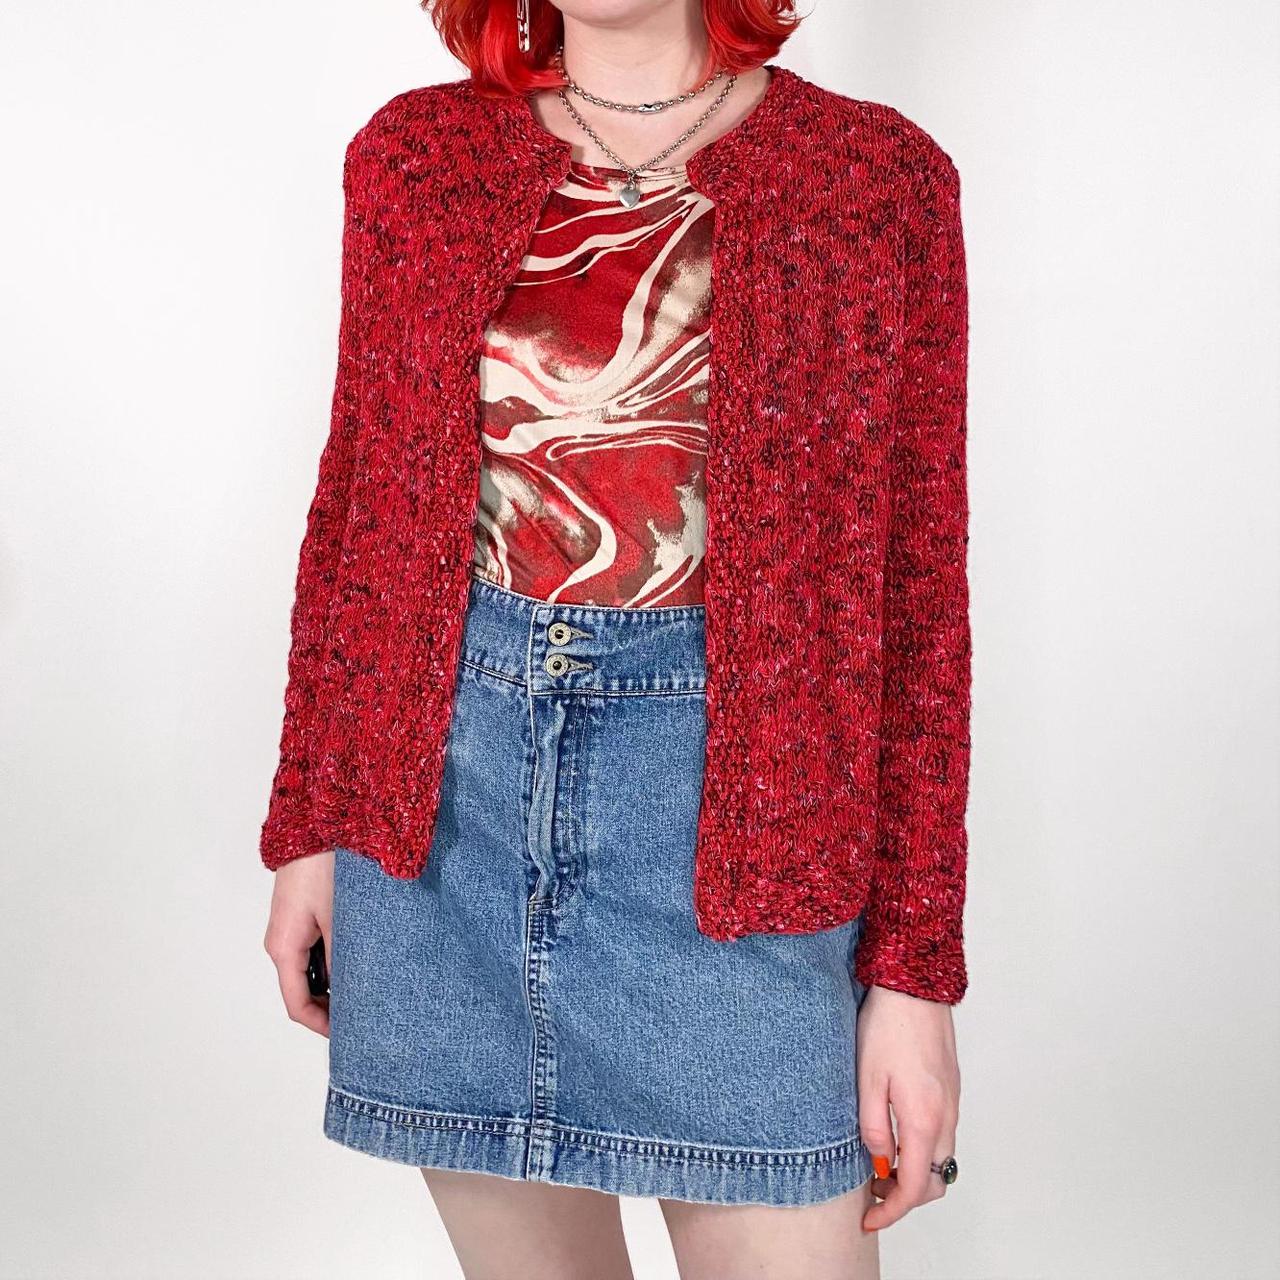 Product Image 2 - Red marble knit cardigan 🍓

Fits